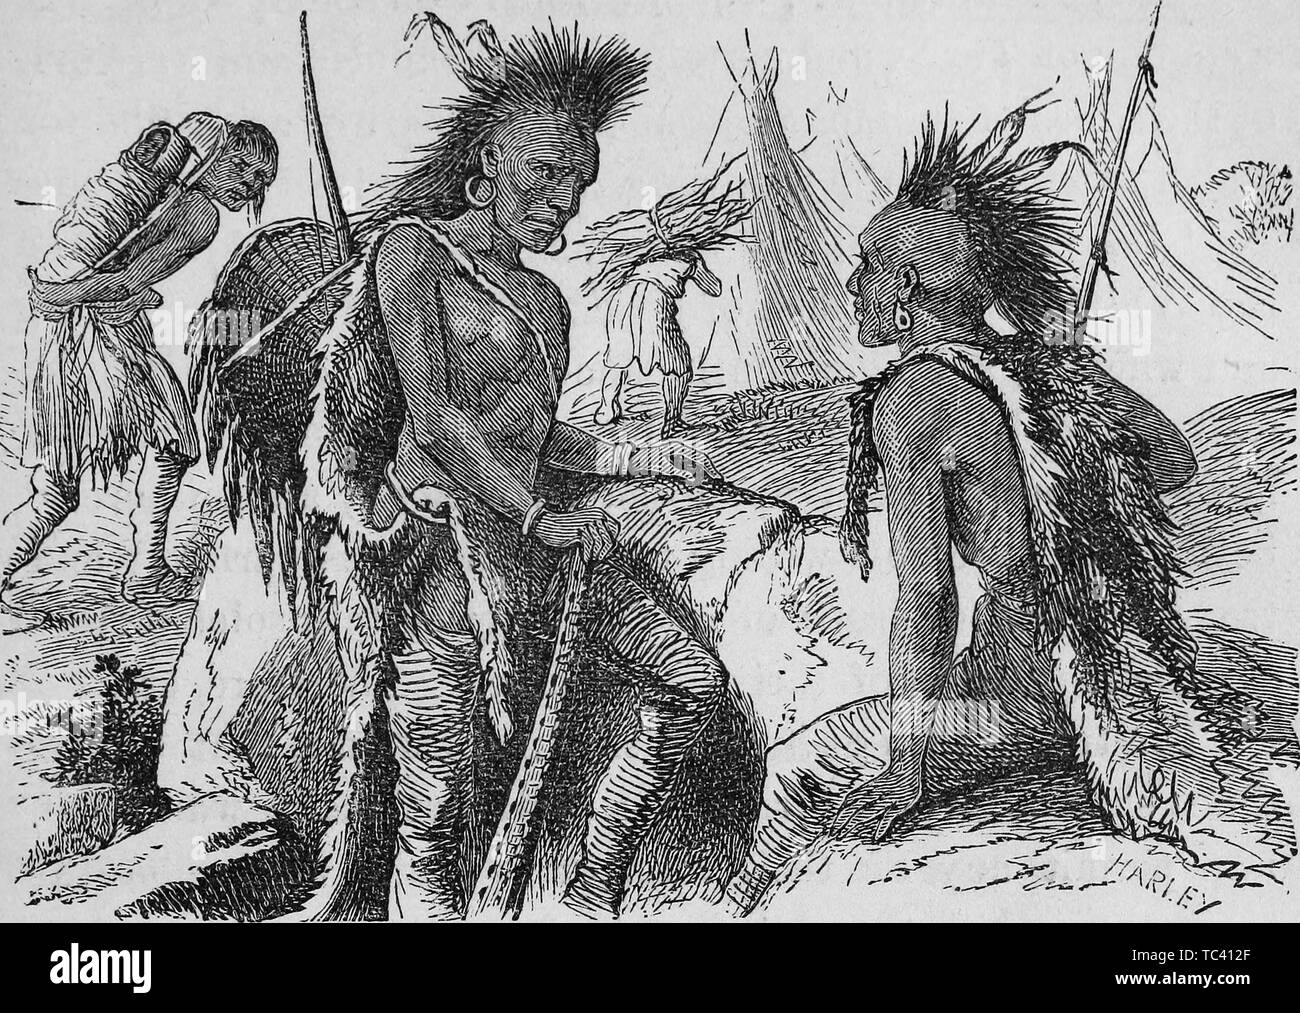 Engraving of two Indian warriors speaking in their village, from the book 'Brief history of Texas from its earliest settlement to which is appended the constitution of the state' by De Witt Clinton Baker, 1873. Courtesy Internet Archive. () Stock Photo